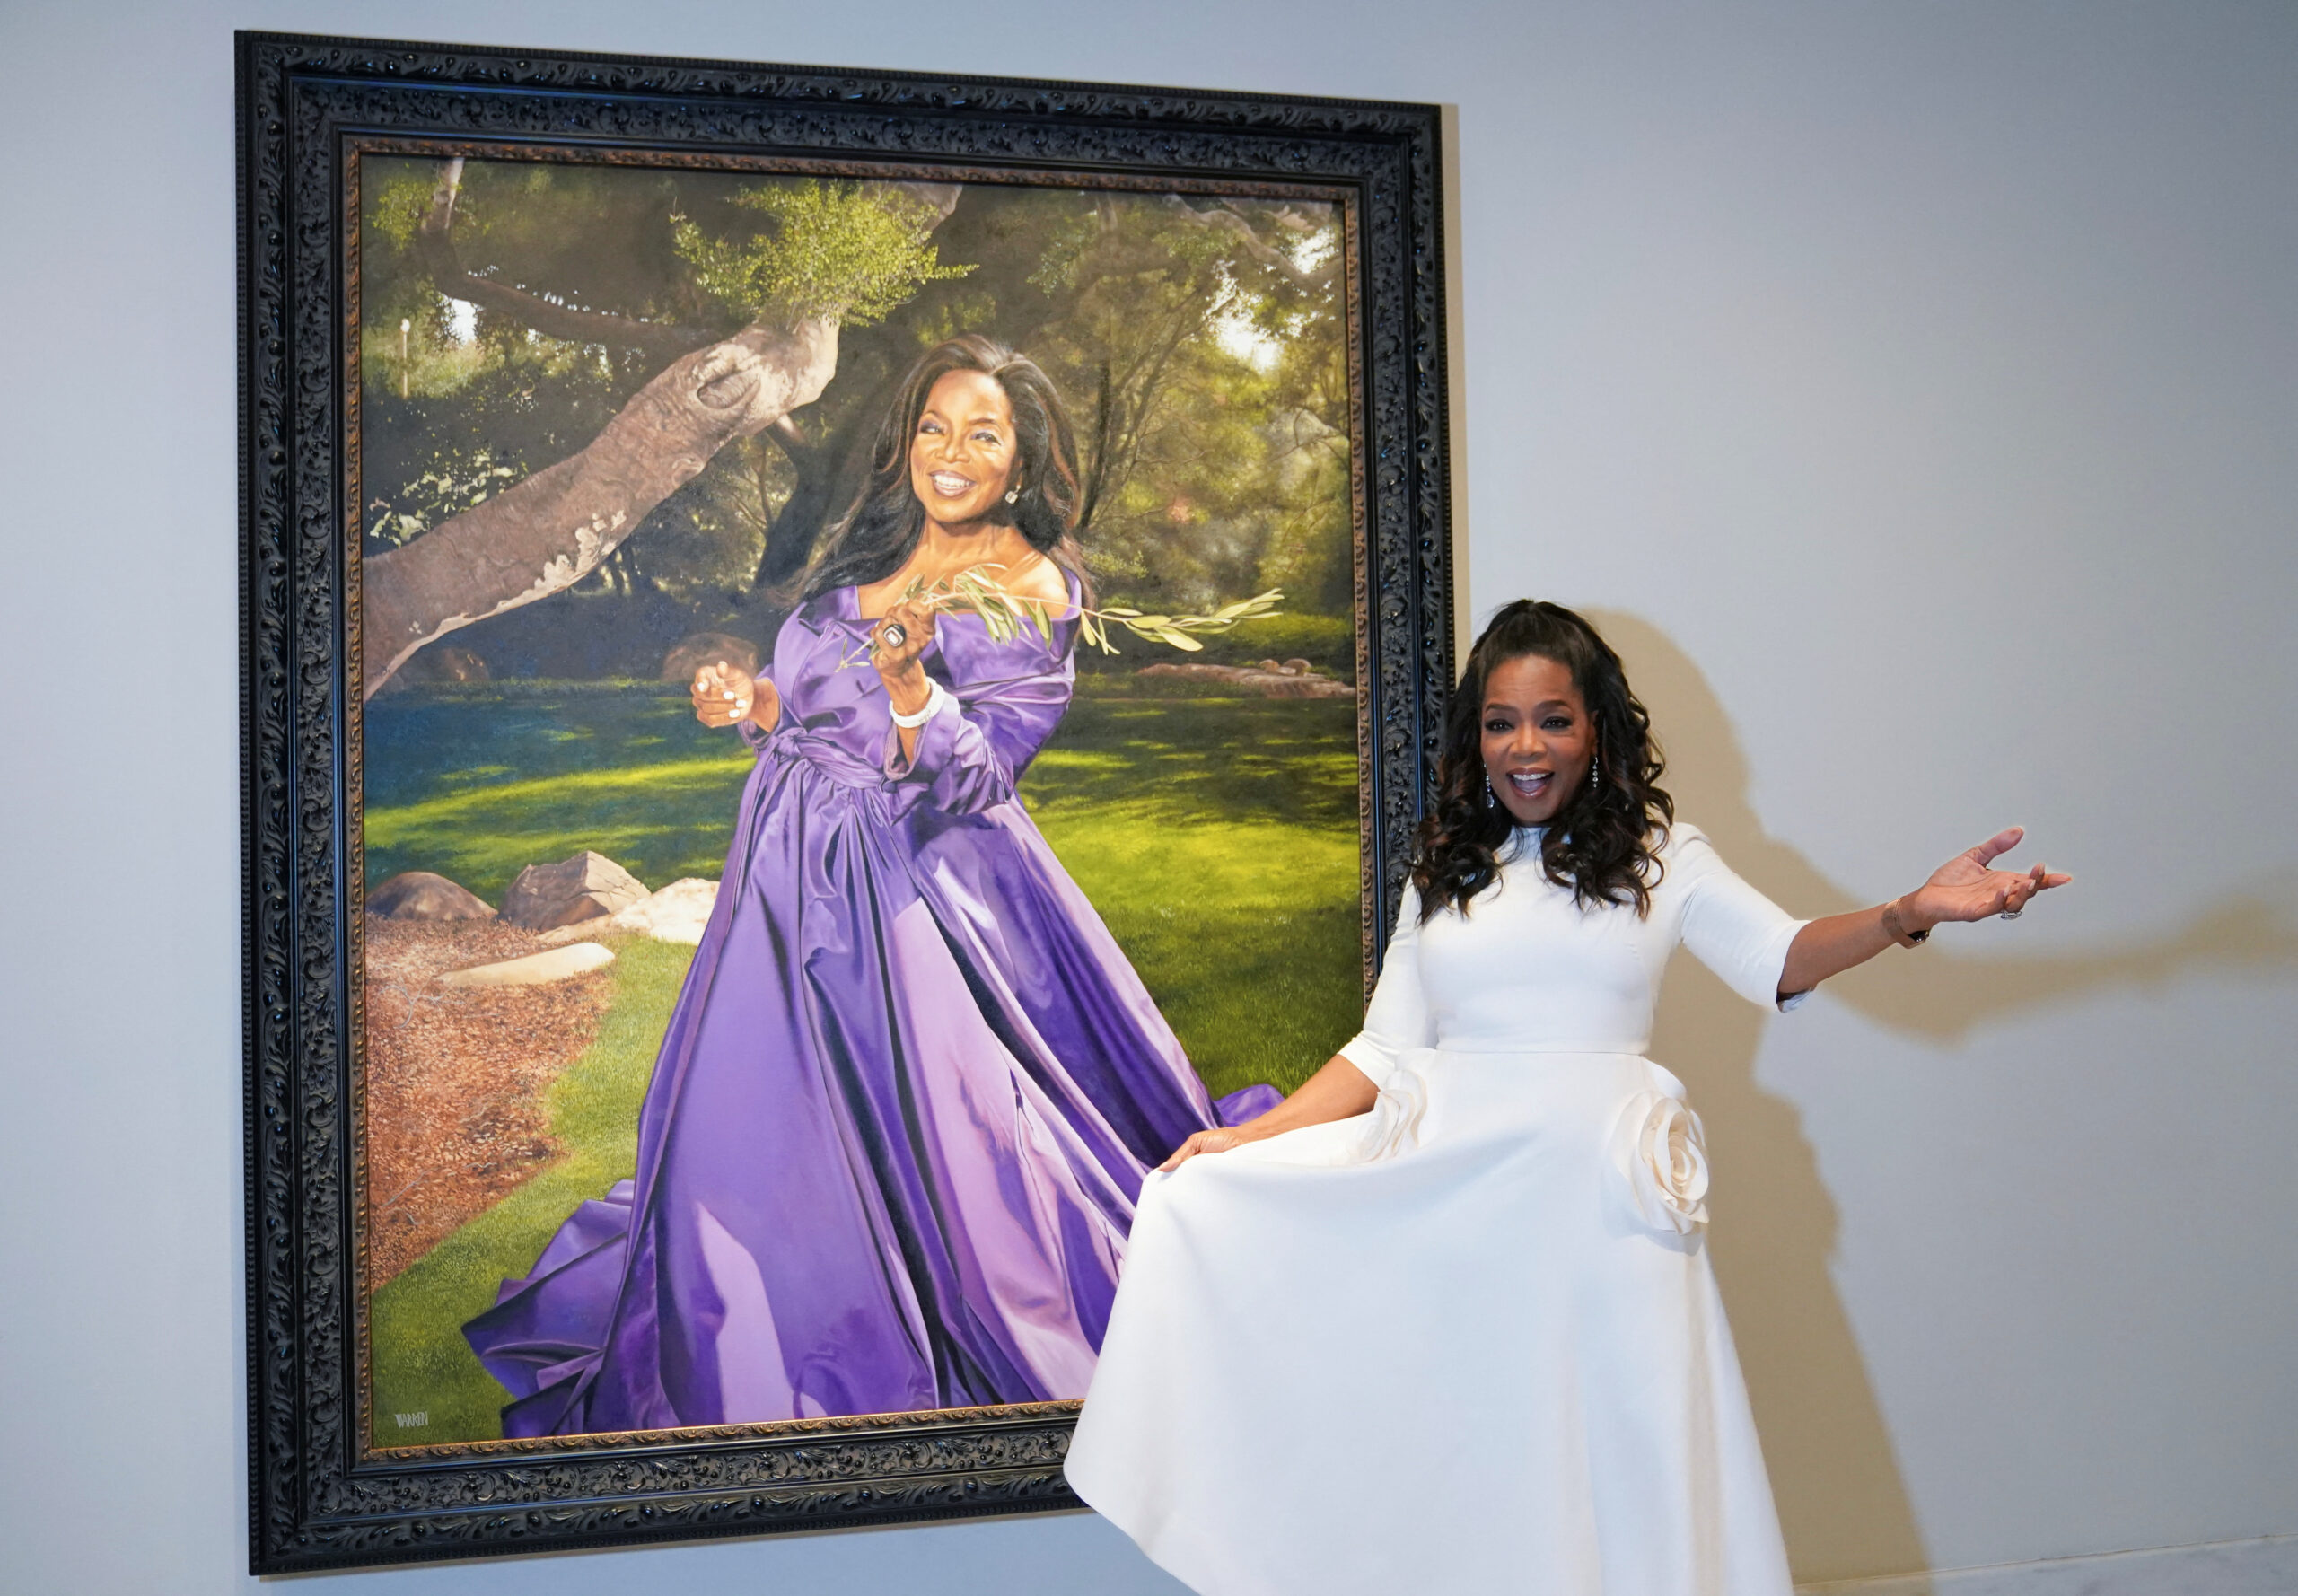 A portrait of Oprah Winfrey, media personality and former talk show host, was unveiled at the Smithsonian's National Portrait Gallery.